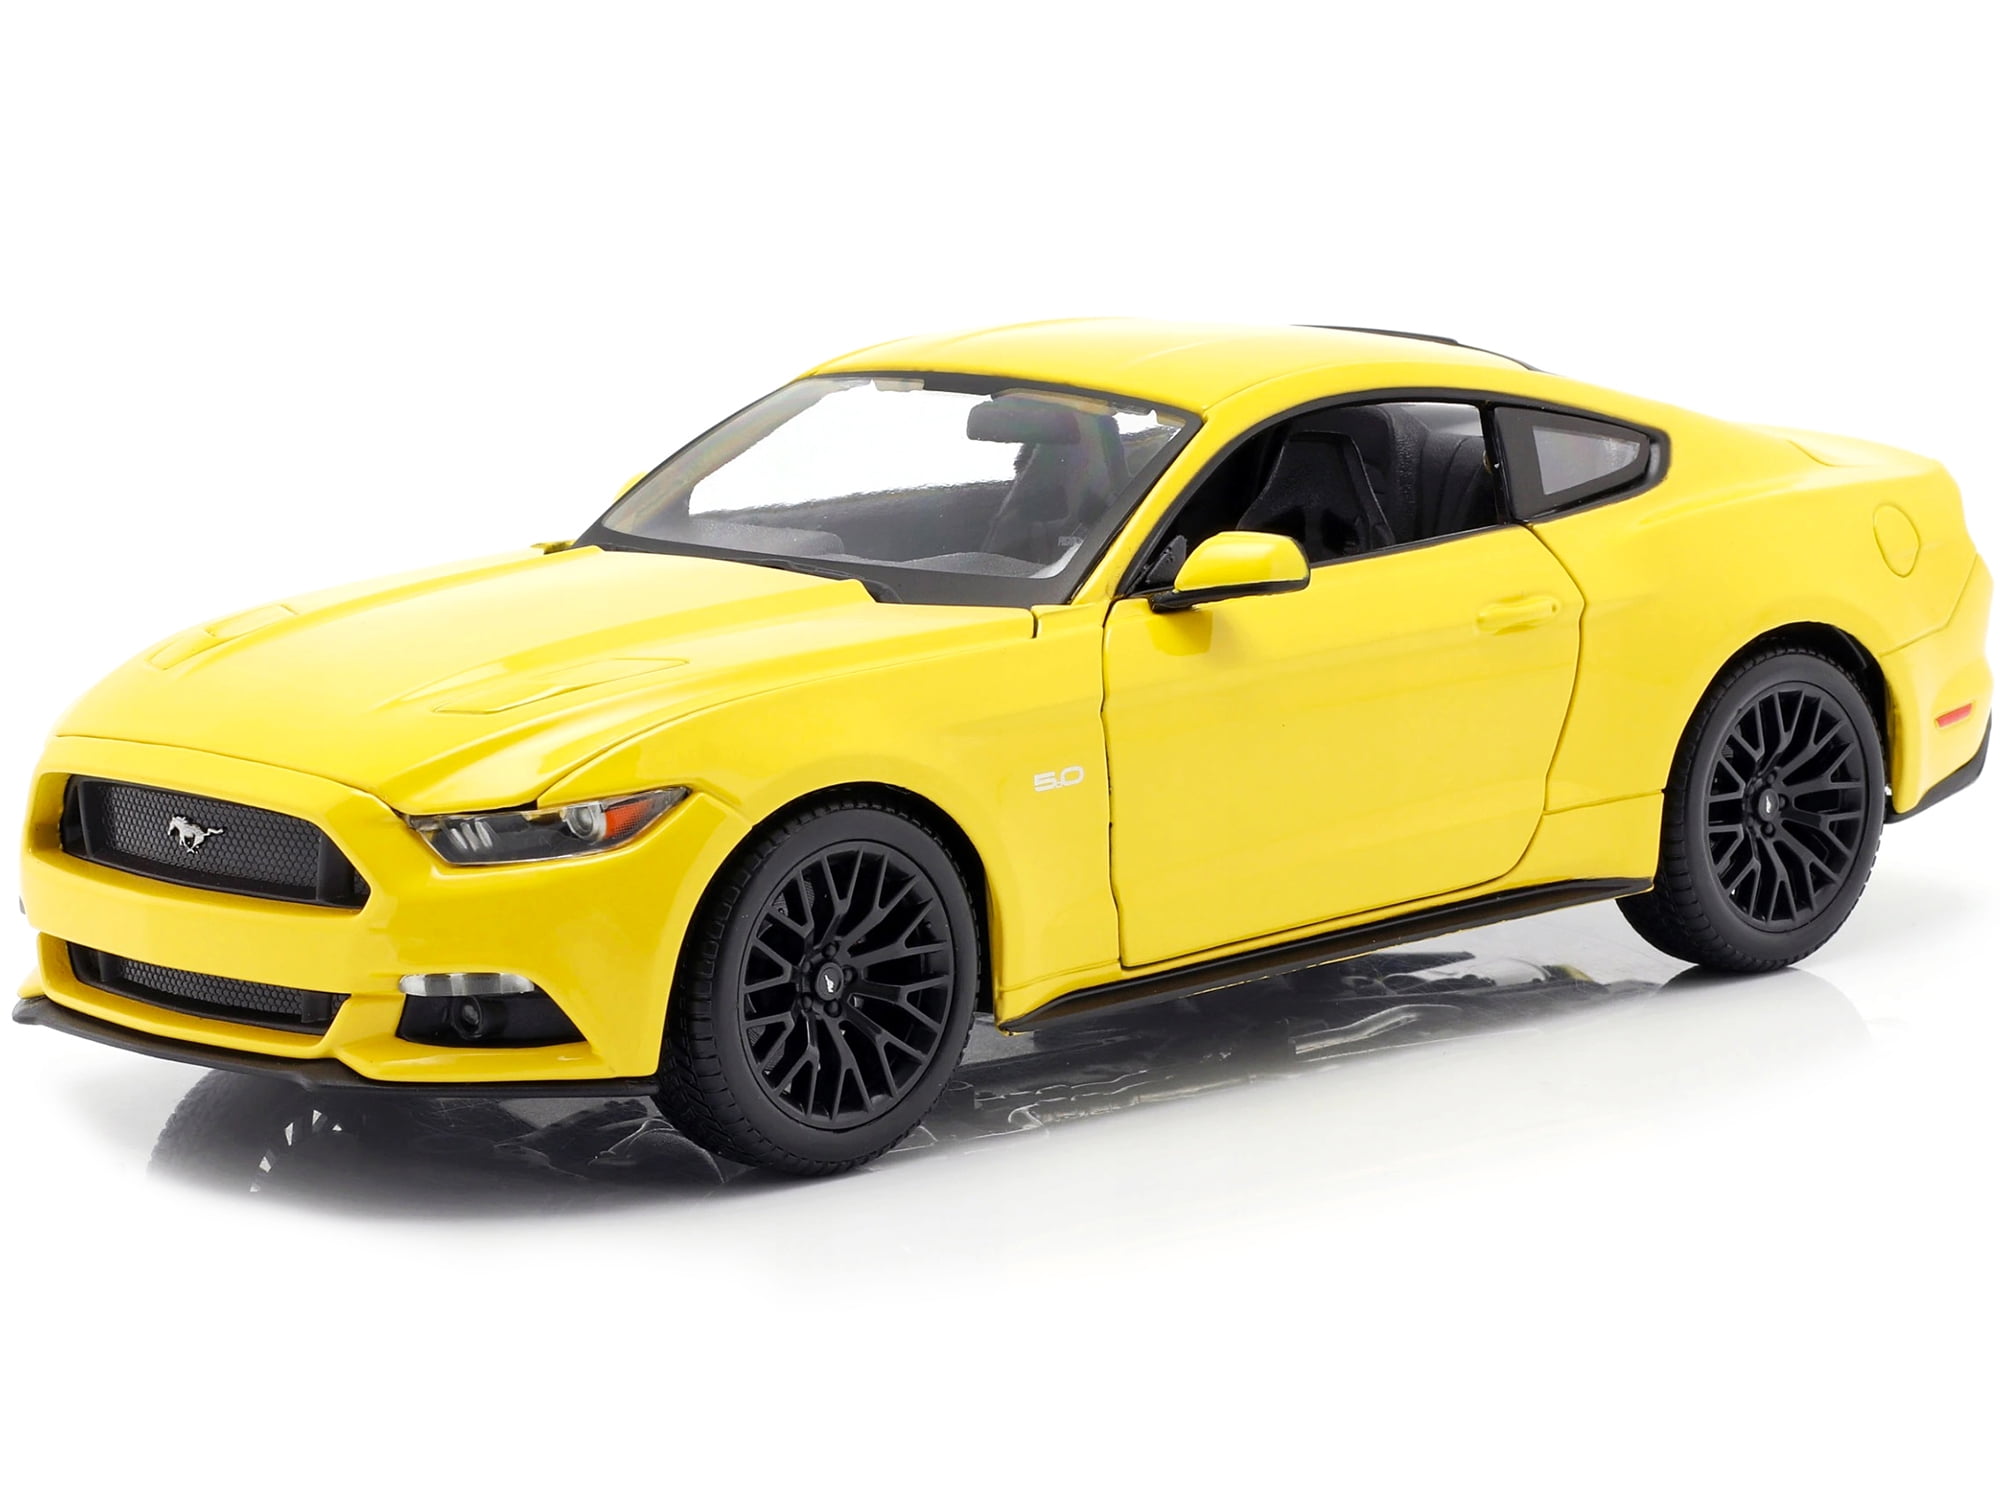 Ford Mustang 2015 Muscle Car 1:36 Scale Model Car Diecast Toy Vehicle Yellow Kid 